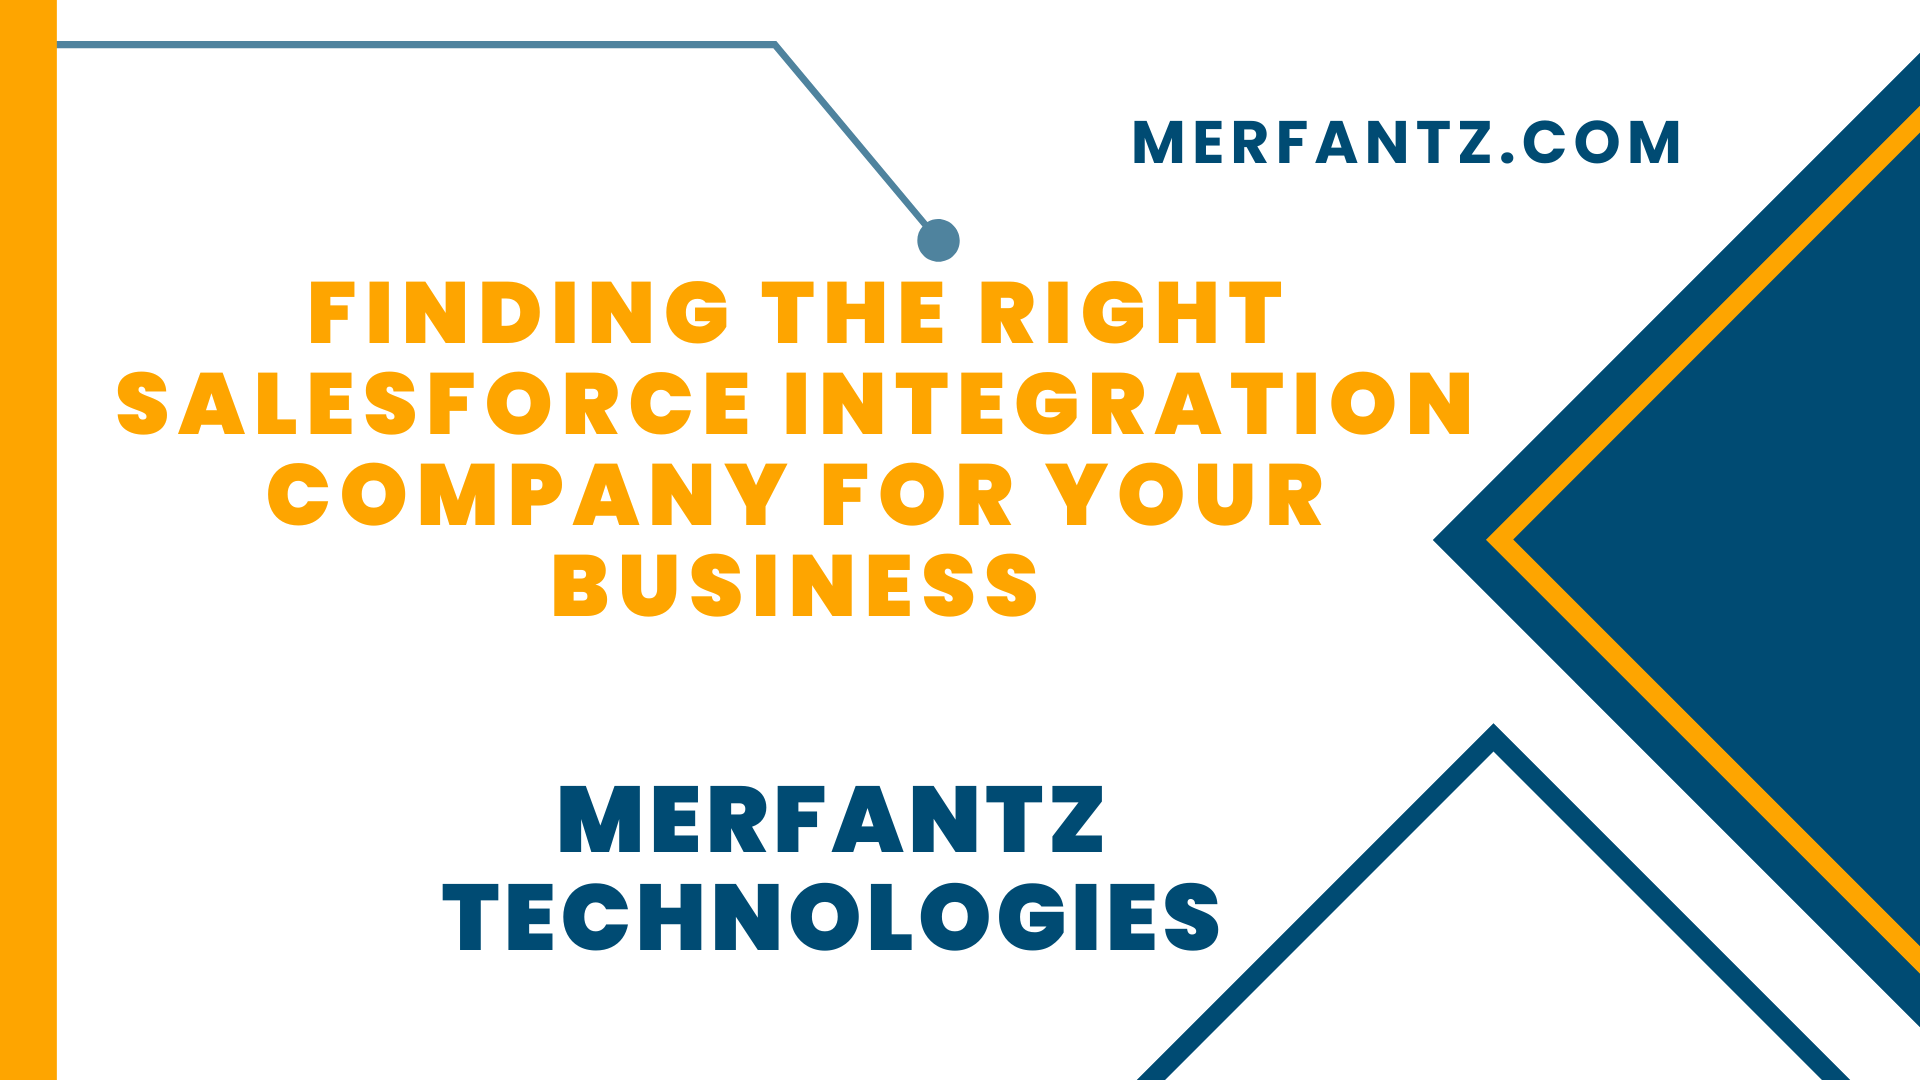 Finding the Right Salesforce Integration Company for Your Business